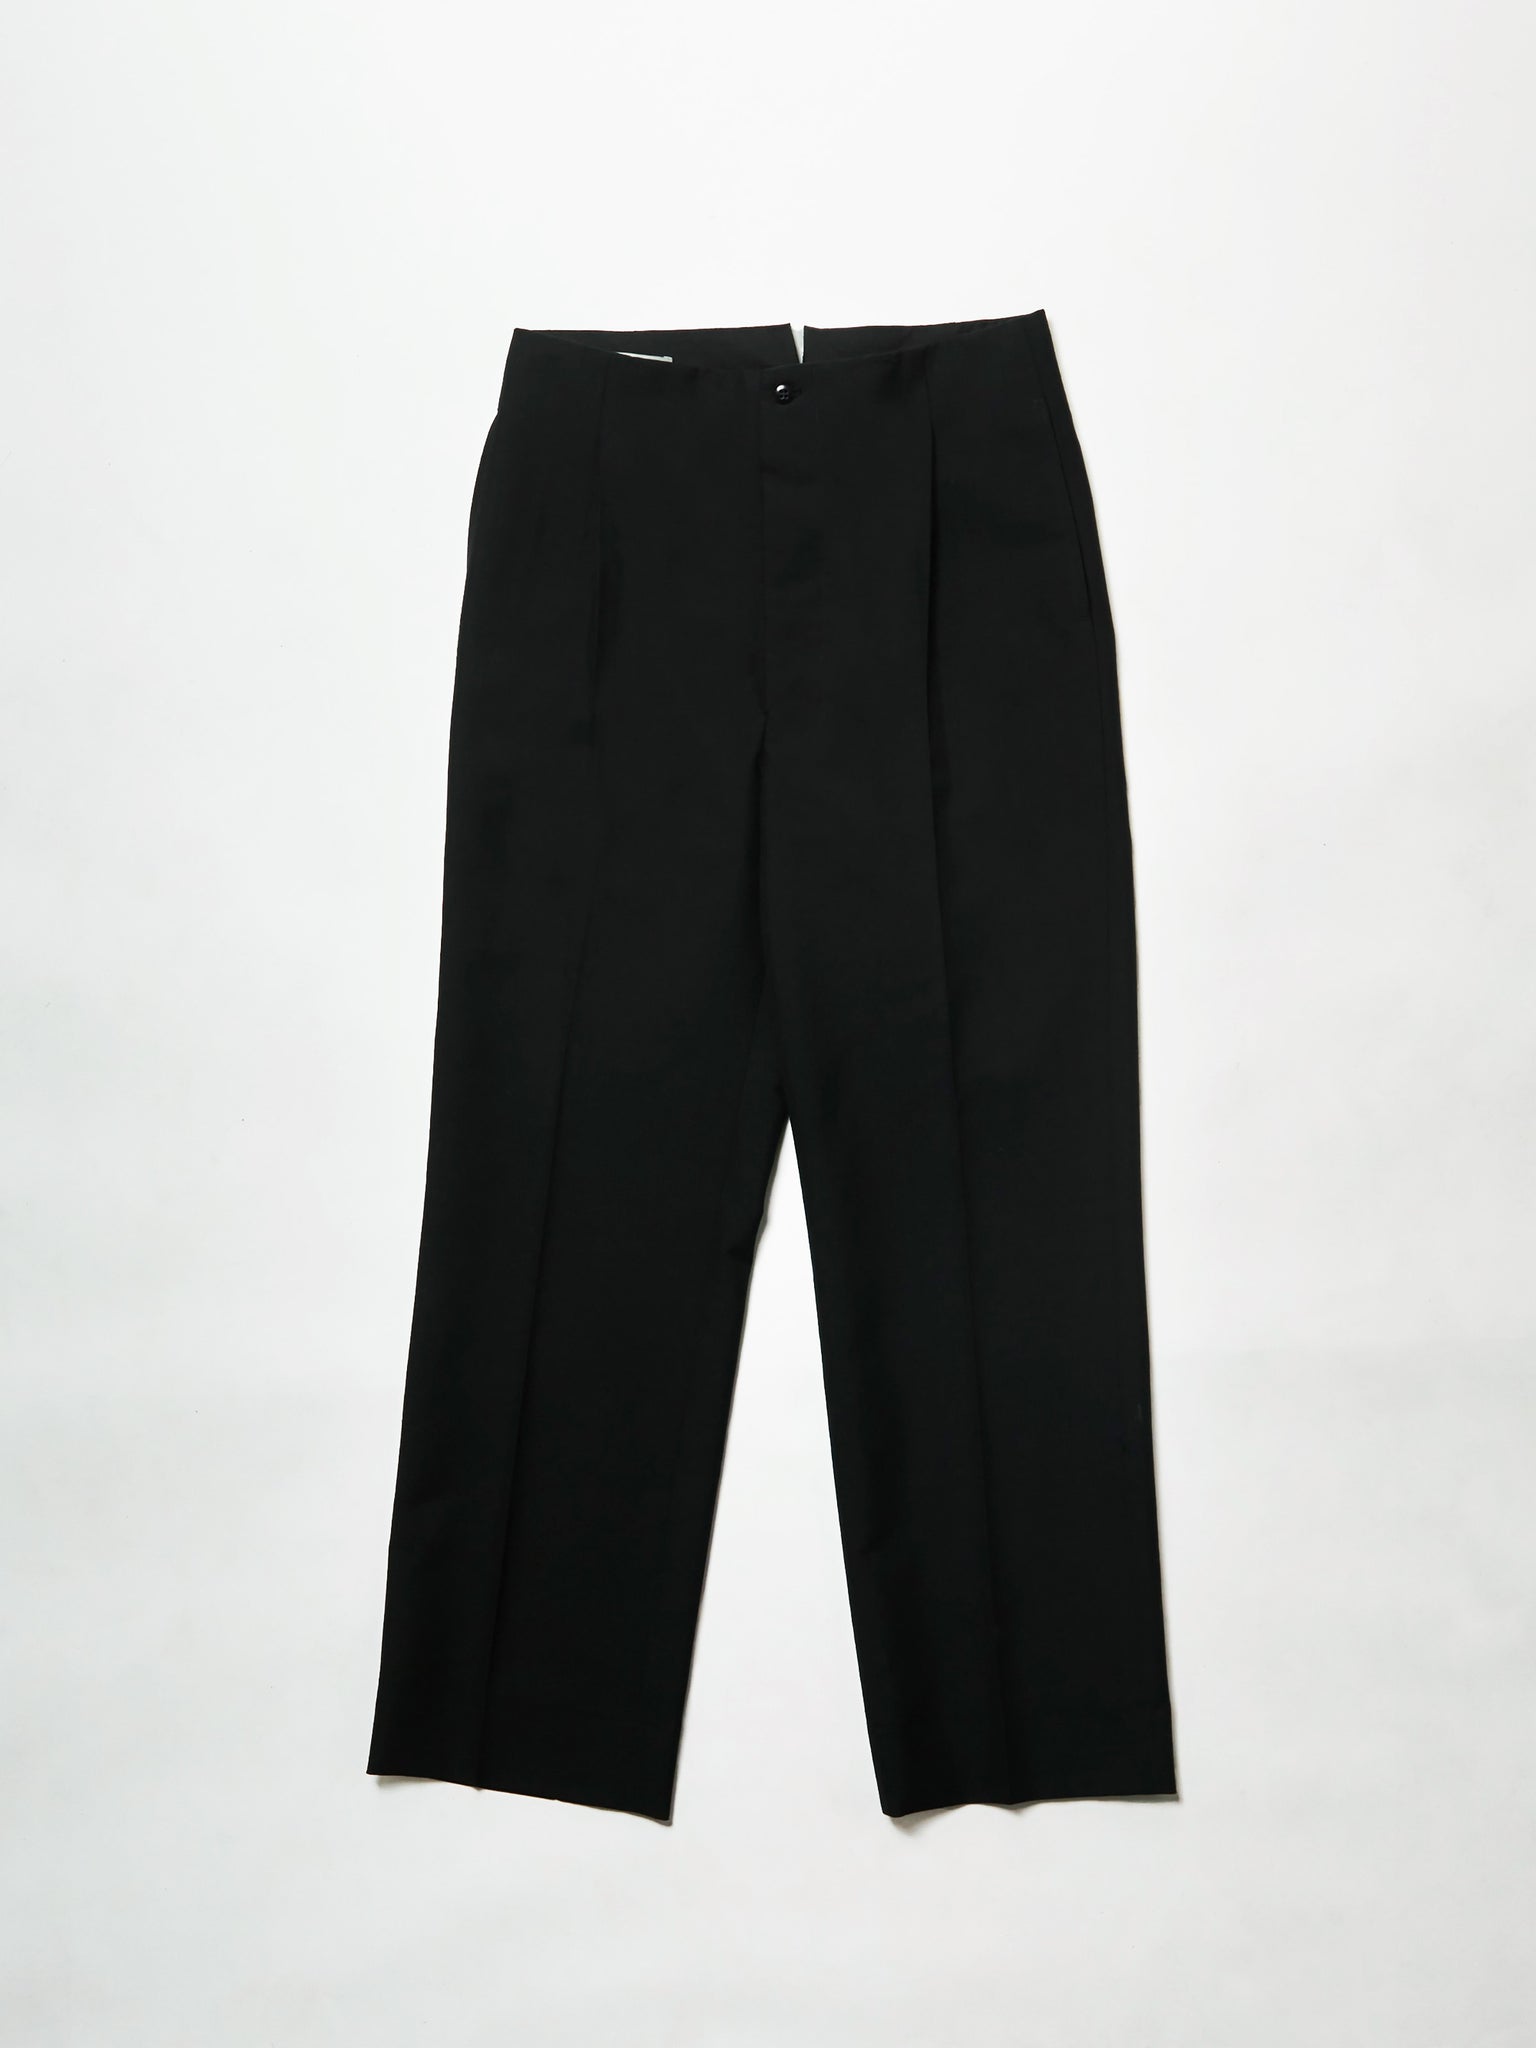 black flat front suiting trousers